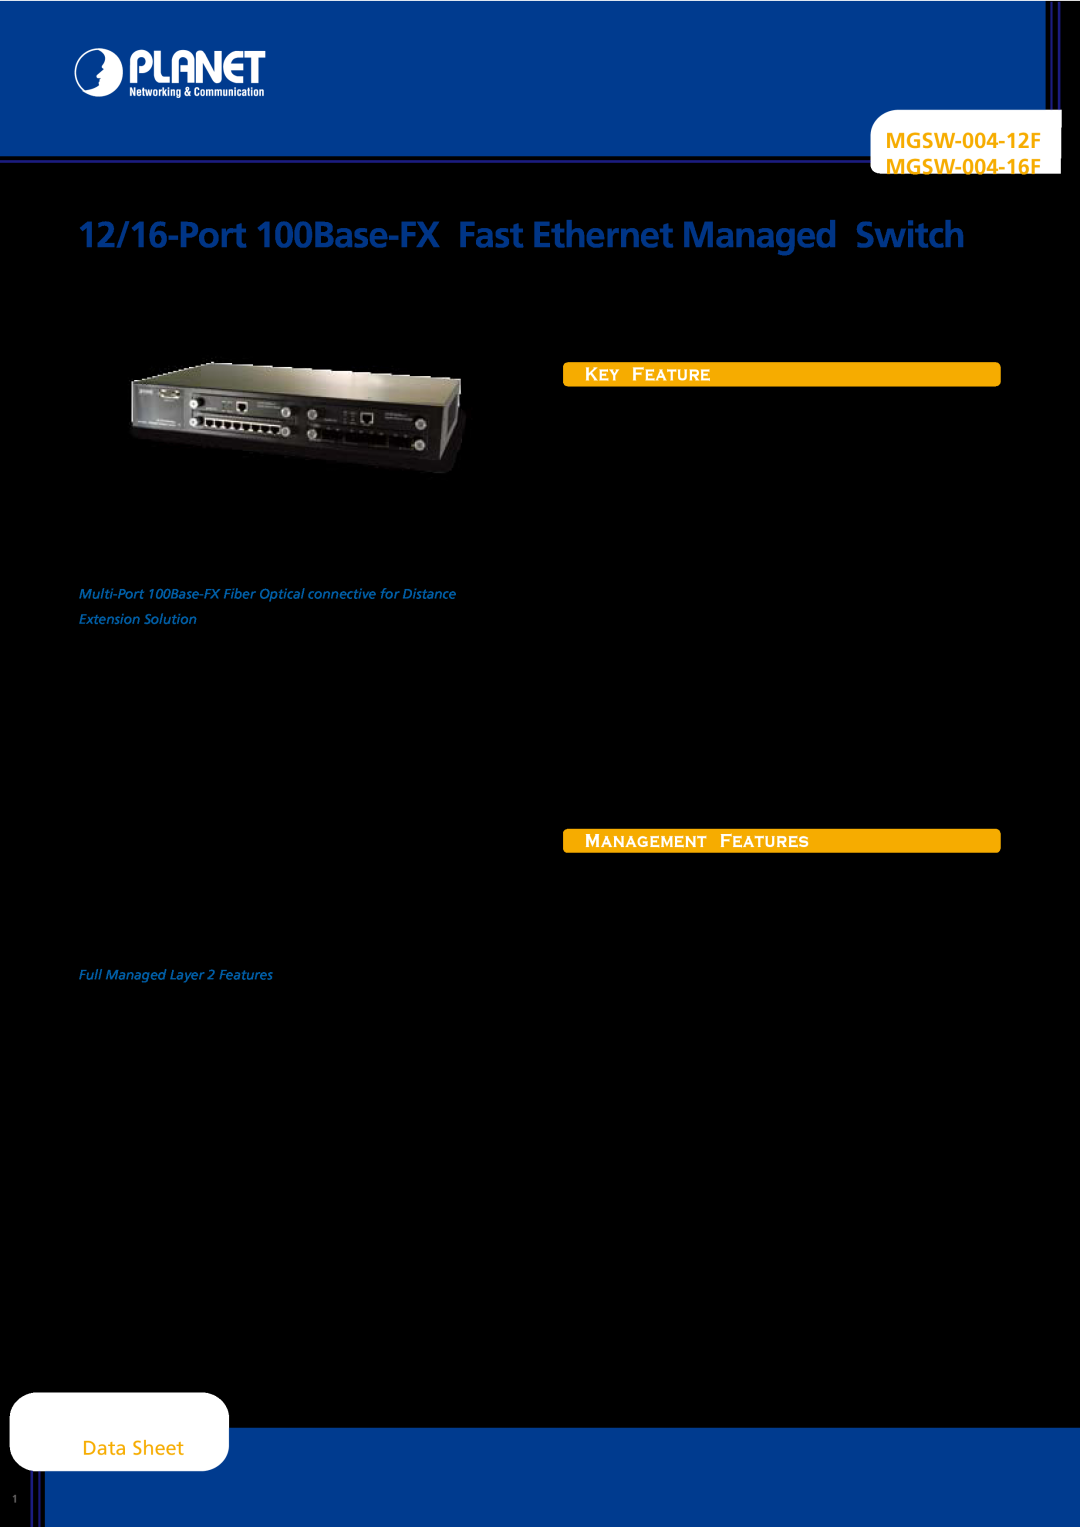 Planet Technology manual MGSW-004-12F MGSW-004-16F, Key Feature, Management Features, Full Managed Layer 2 Features 